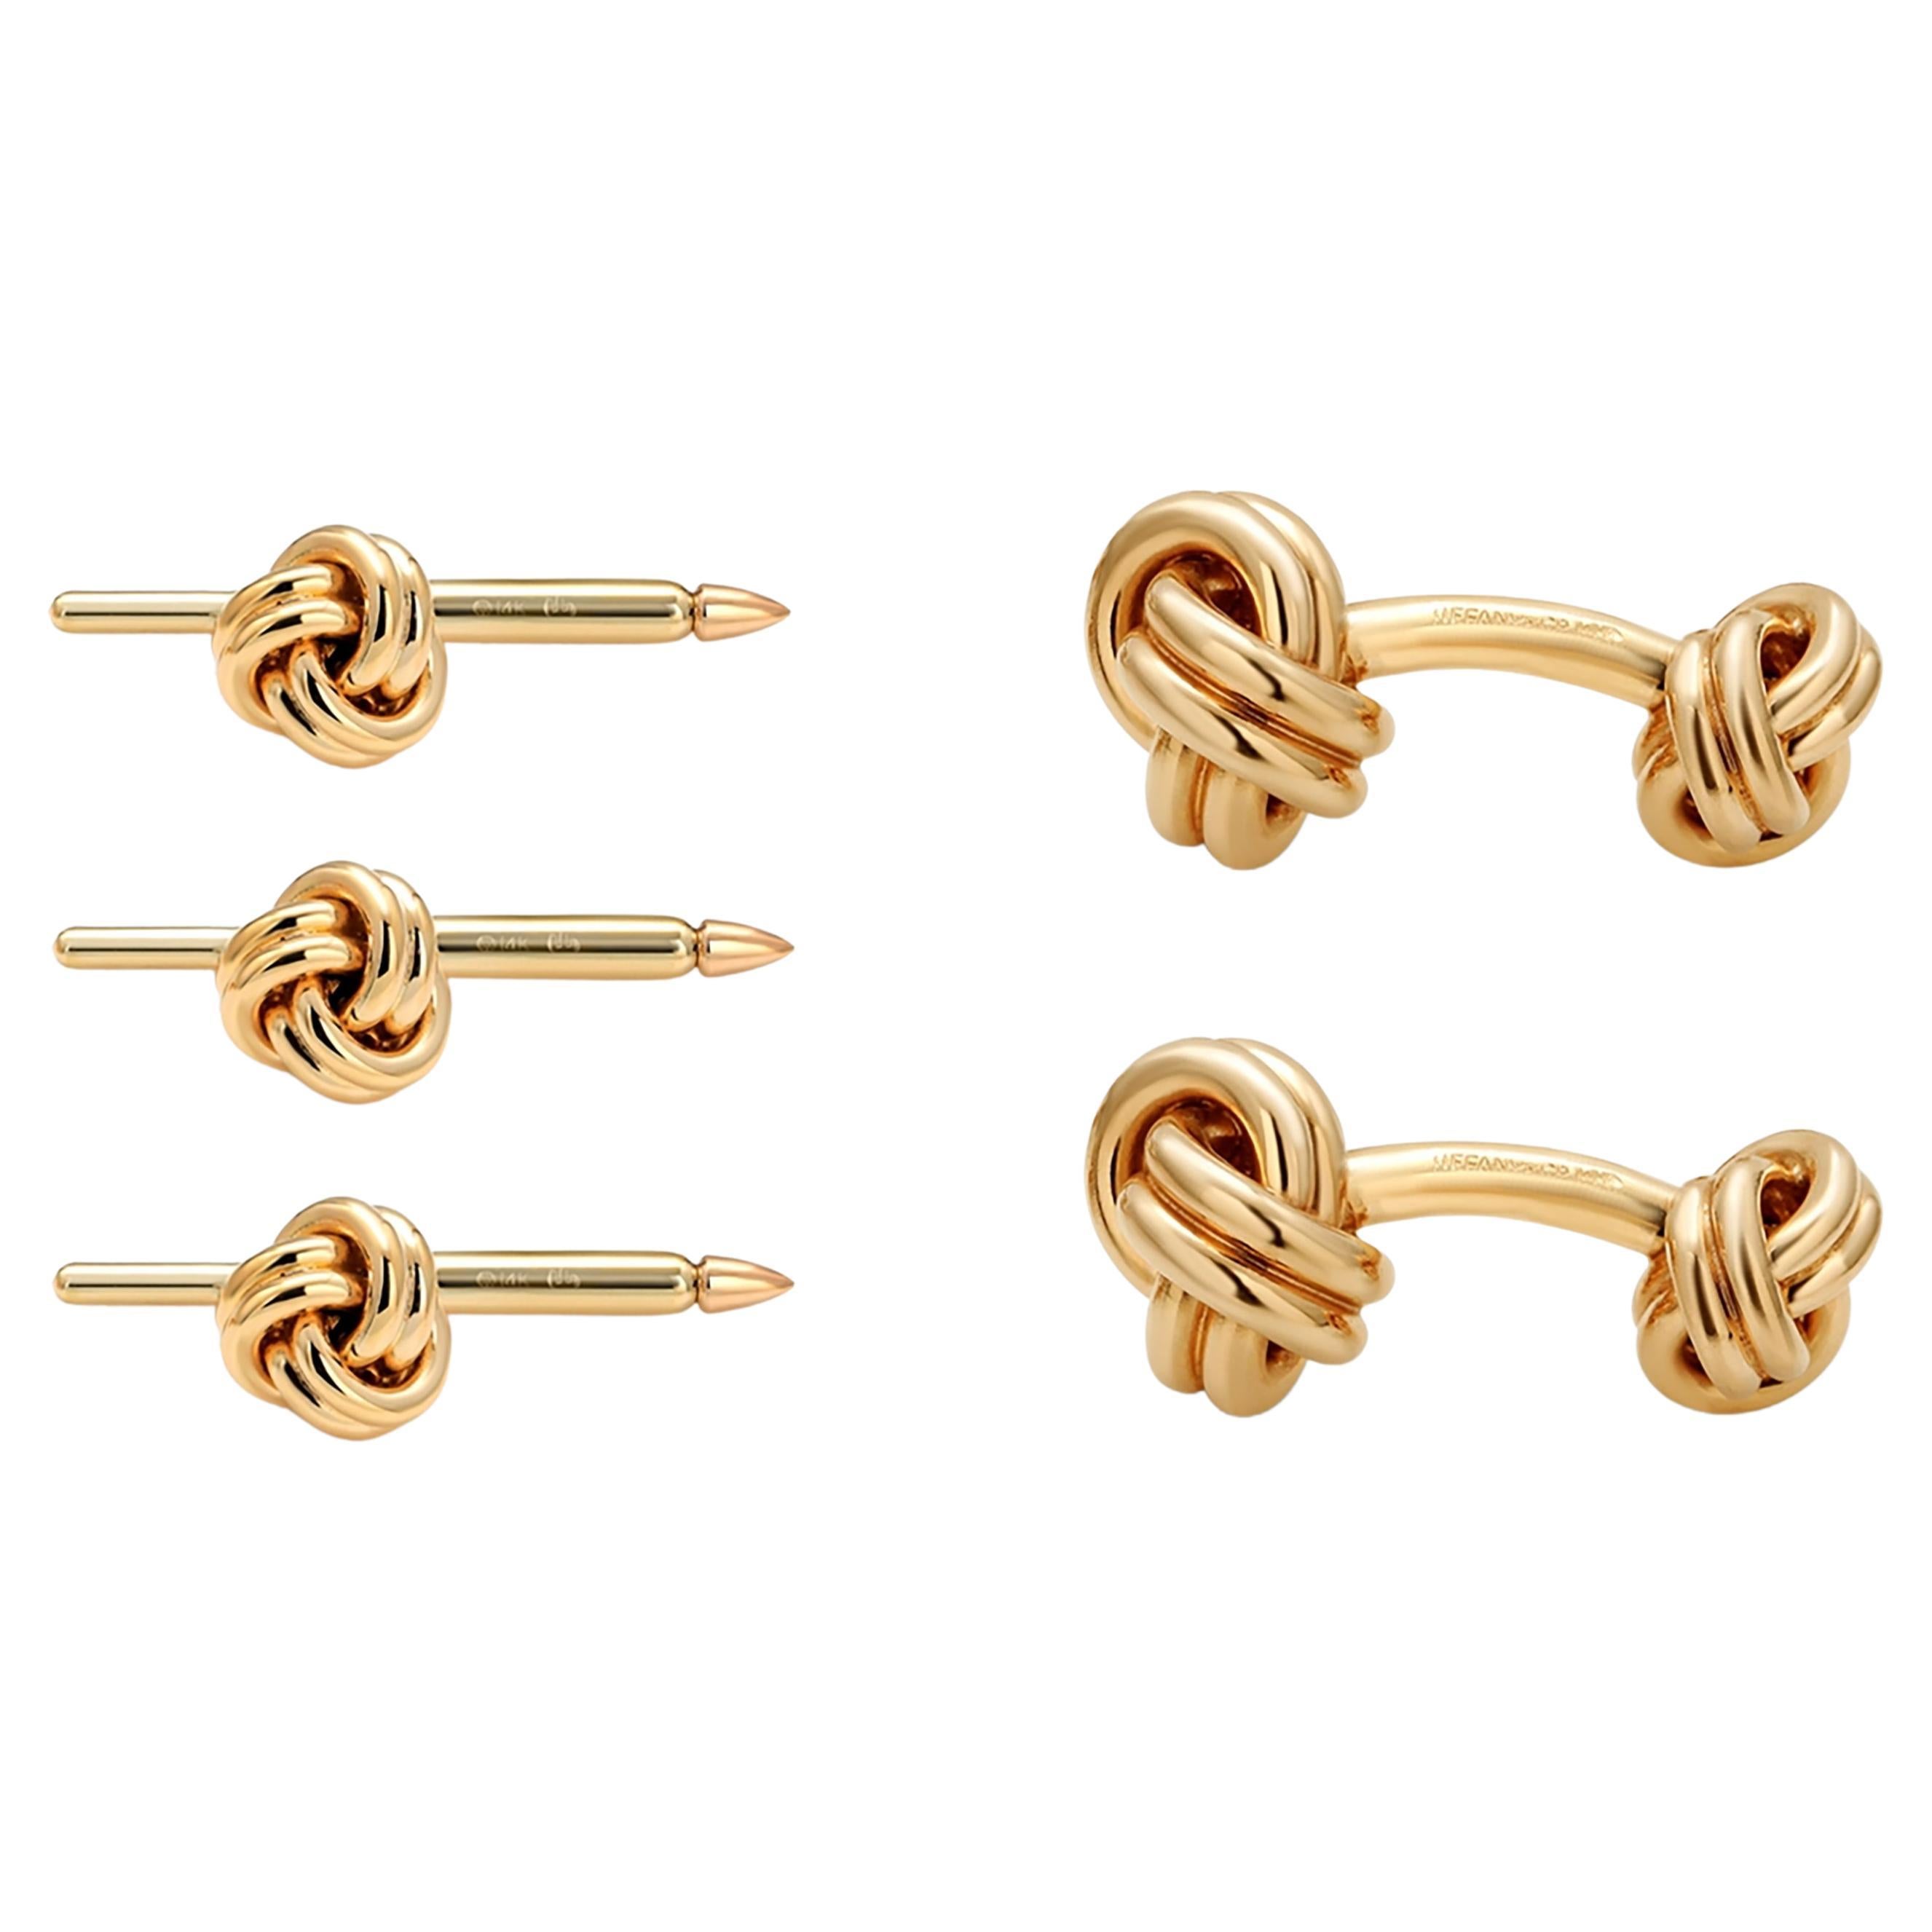 Tiffany and Co. Yellow Gold Double Knot Cufflinks and Three Shirt Studs